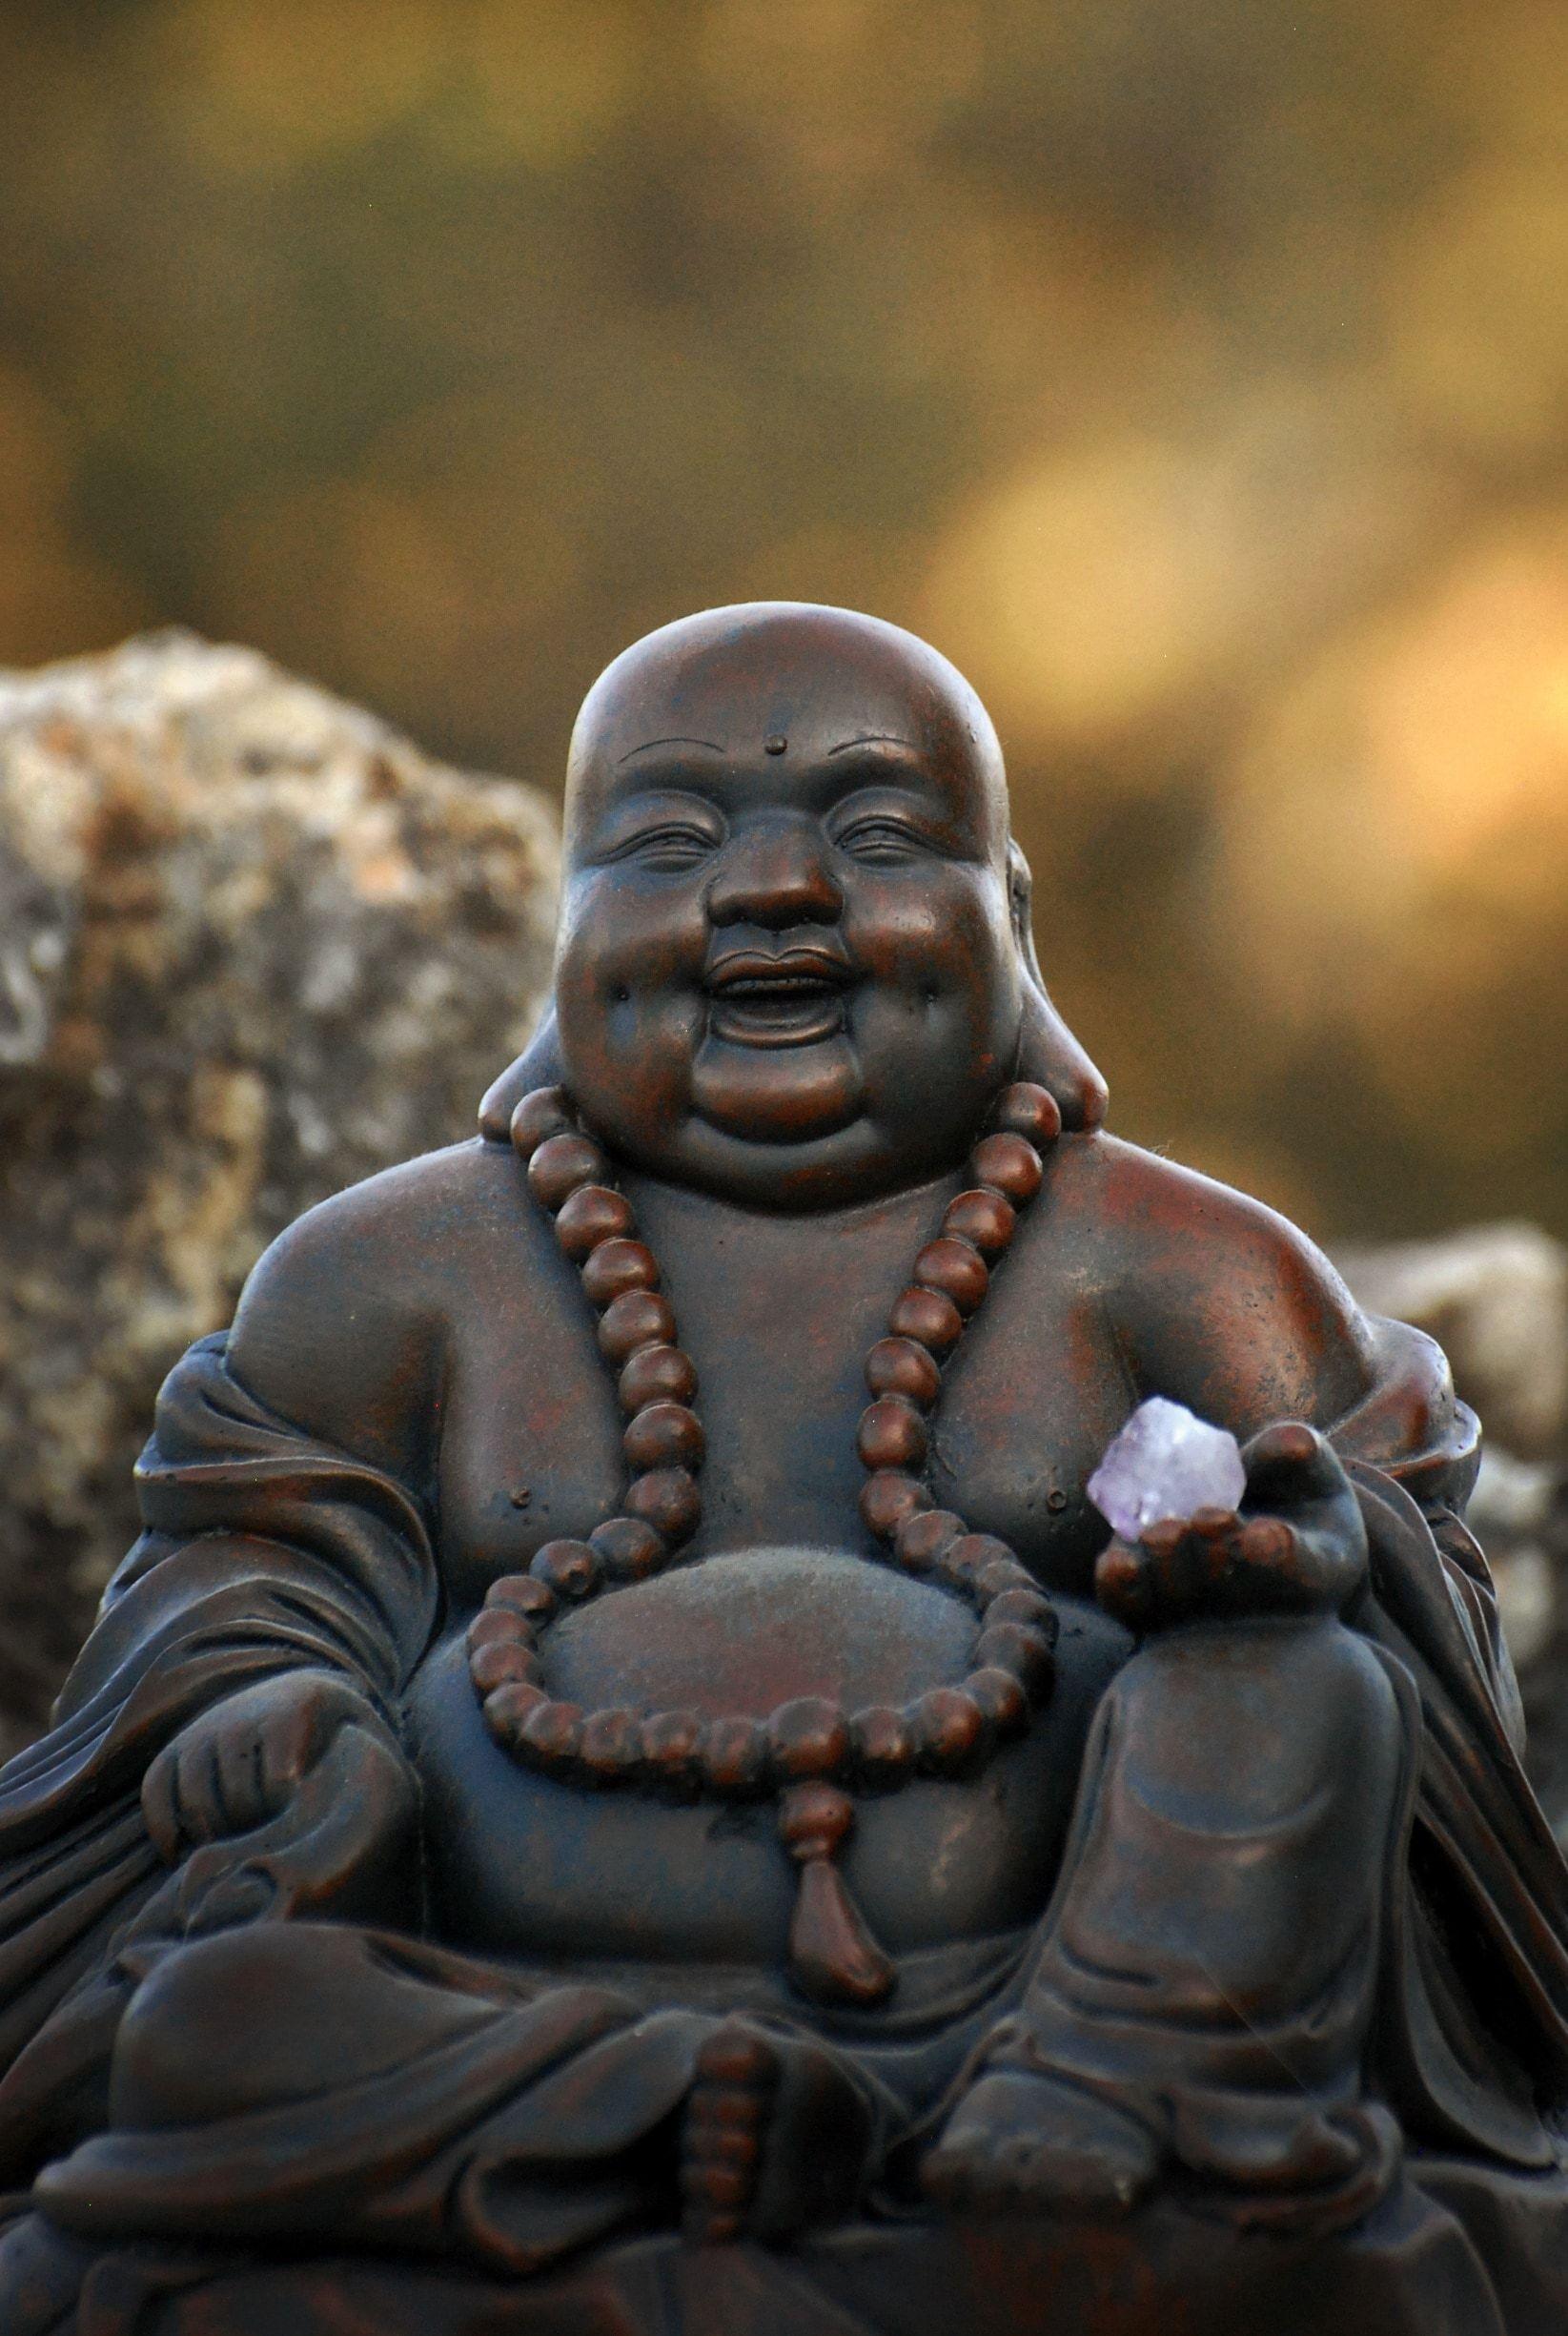 1080p Laughing Buddha Wallpaper Hd Get Images Four